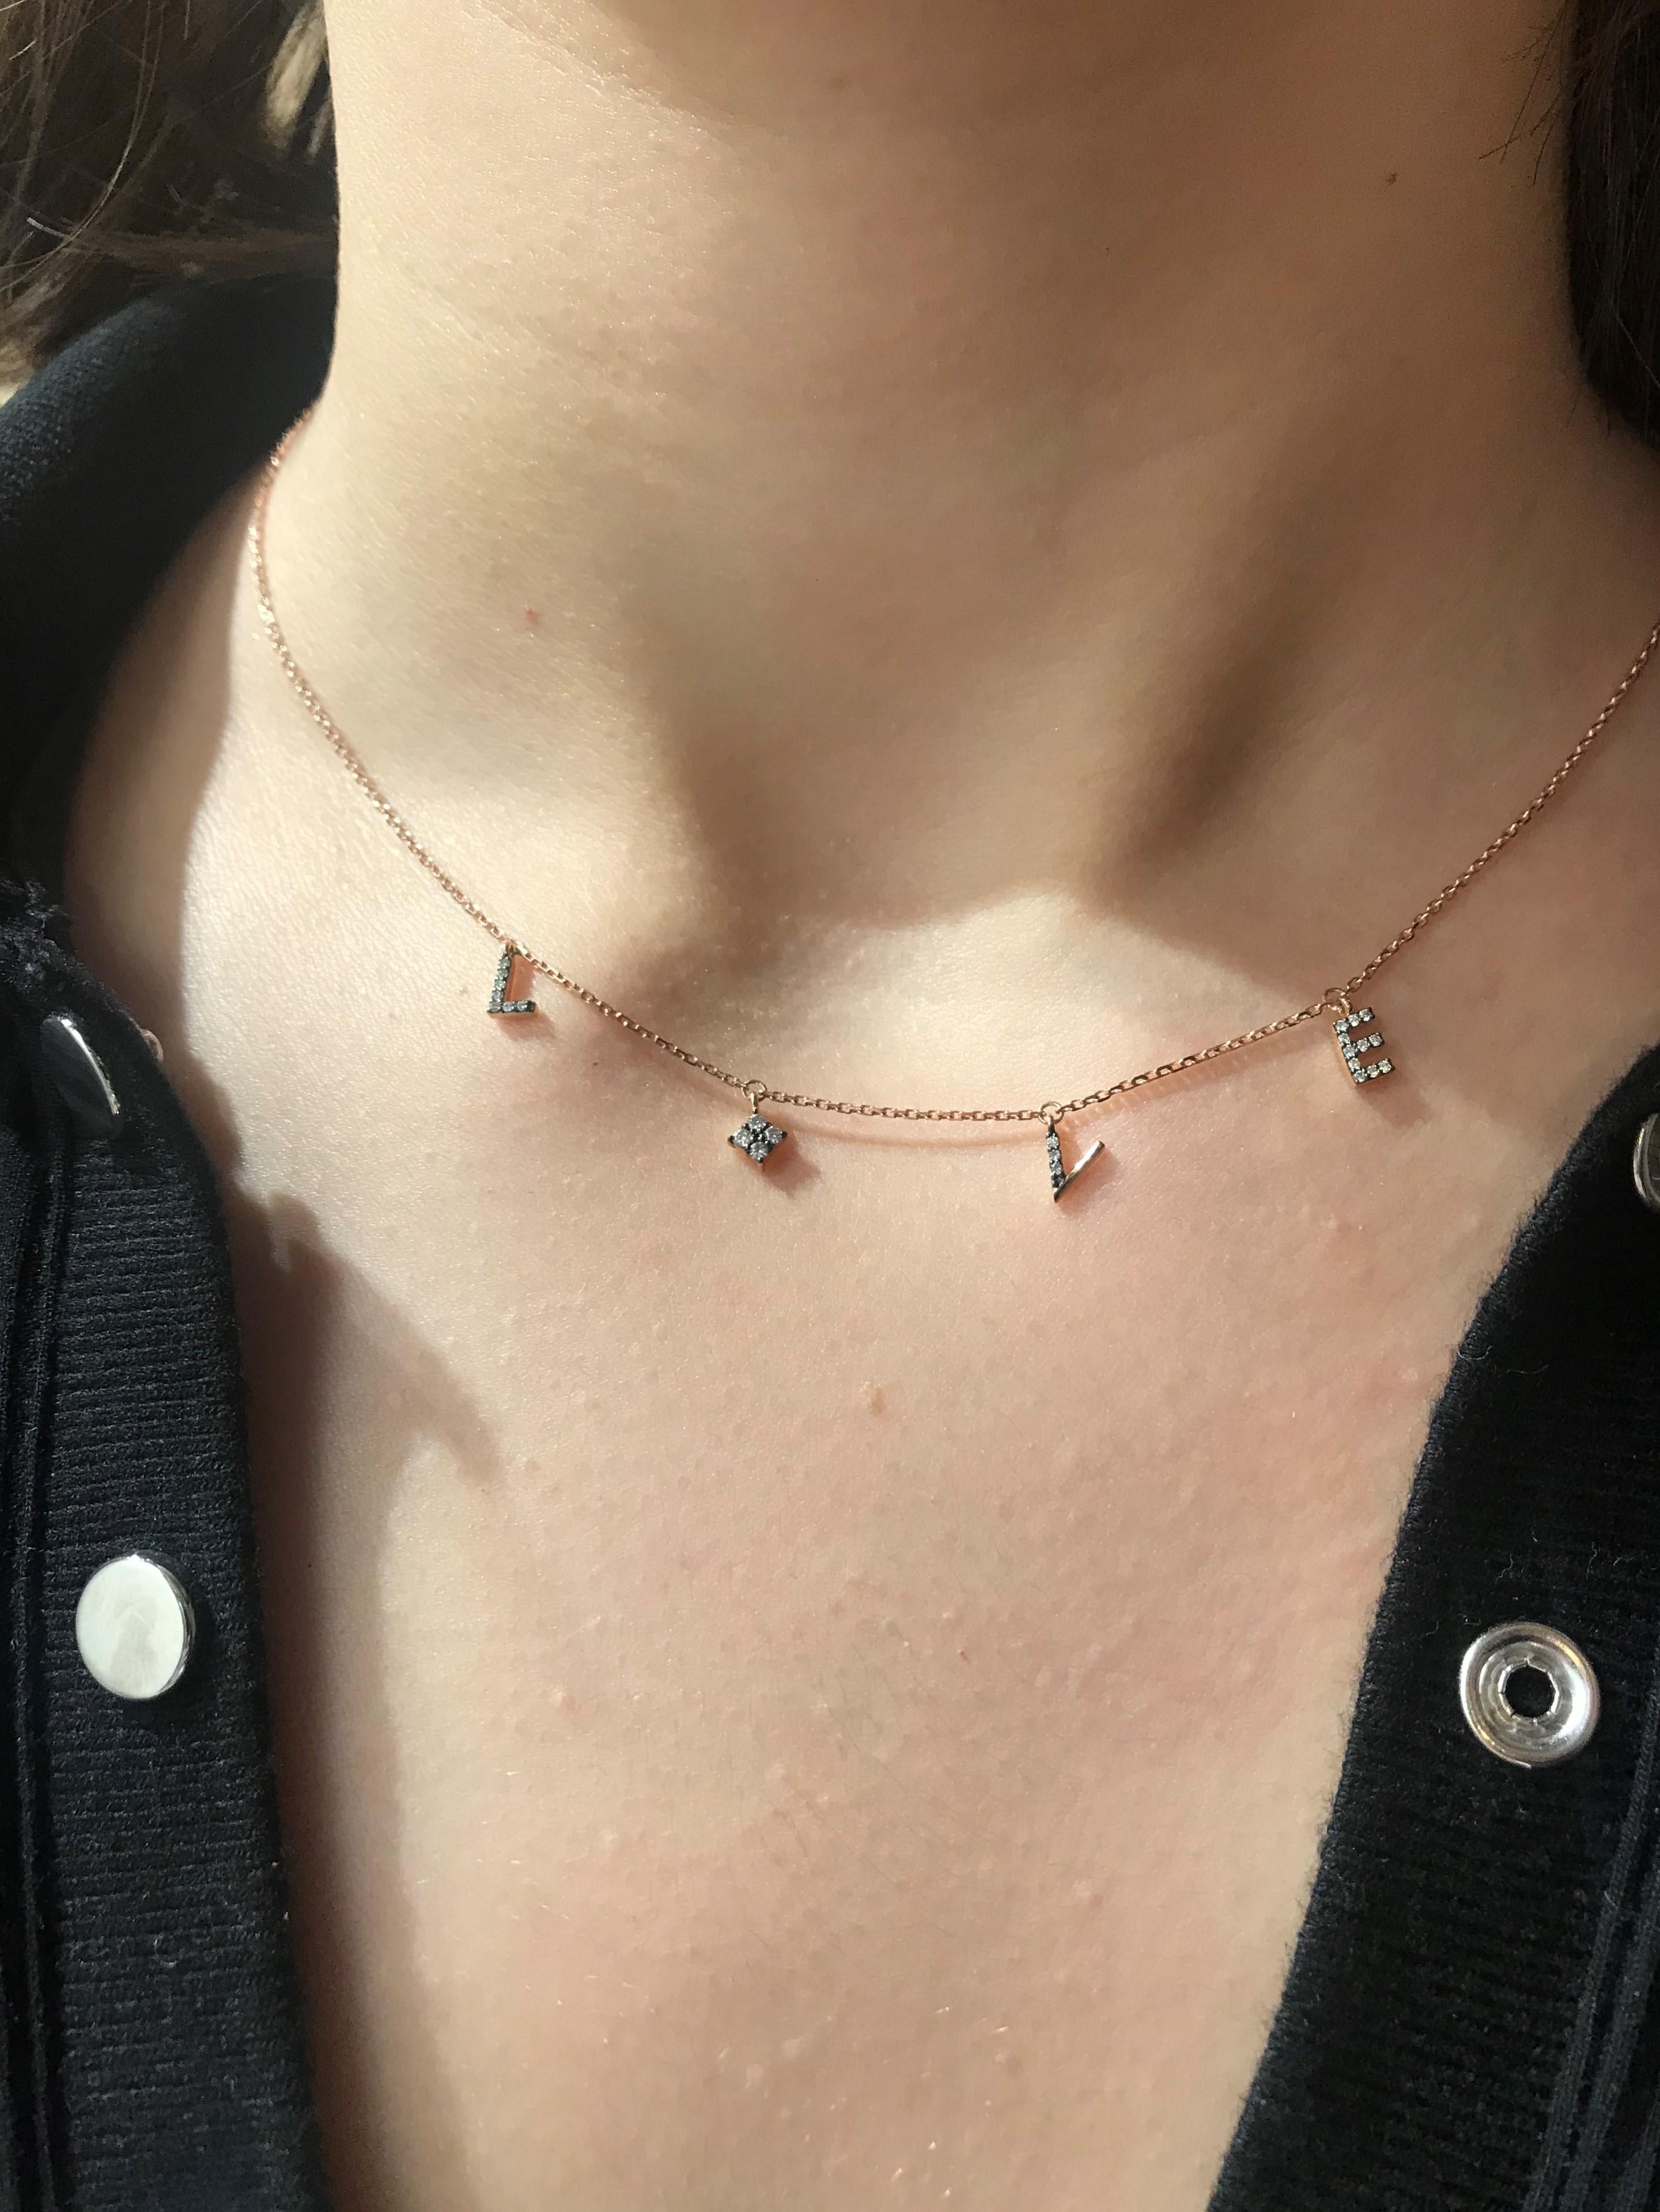 Love necklace with white diamond in 14k rose gold by Selda Jewellery

Additional Information:-
Collection: You Are My Star Collection
14k Rose gold
0.1ct White diamond
Chain length 42+4cm